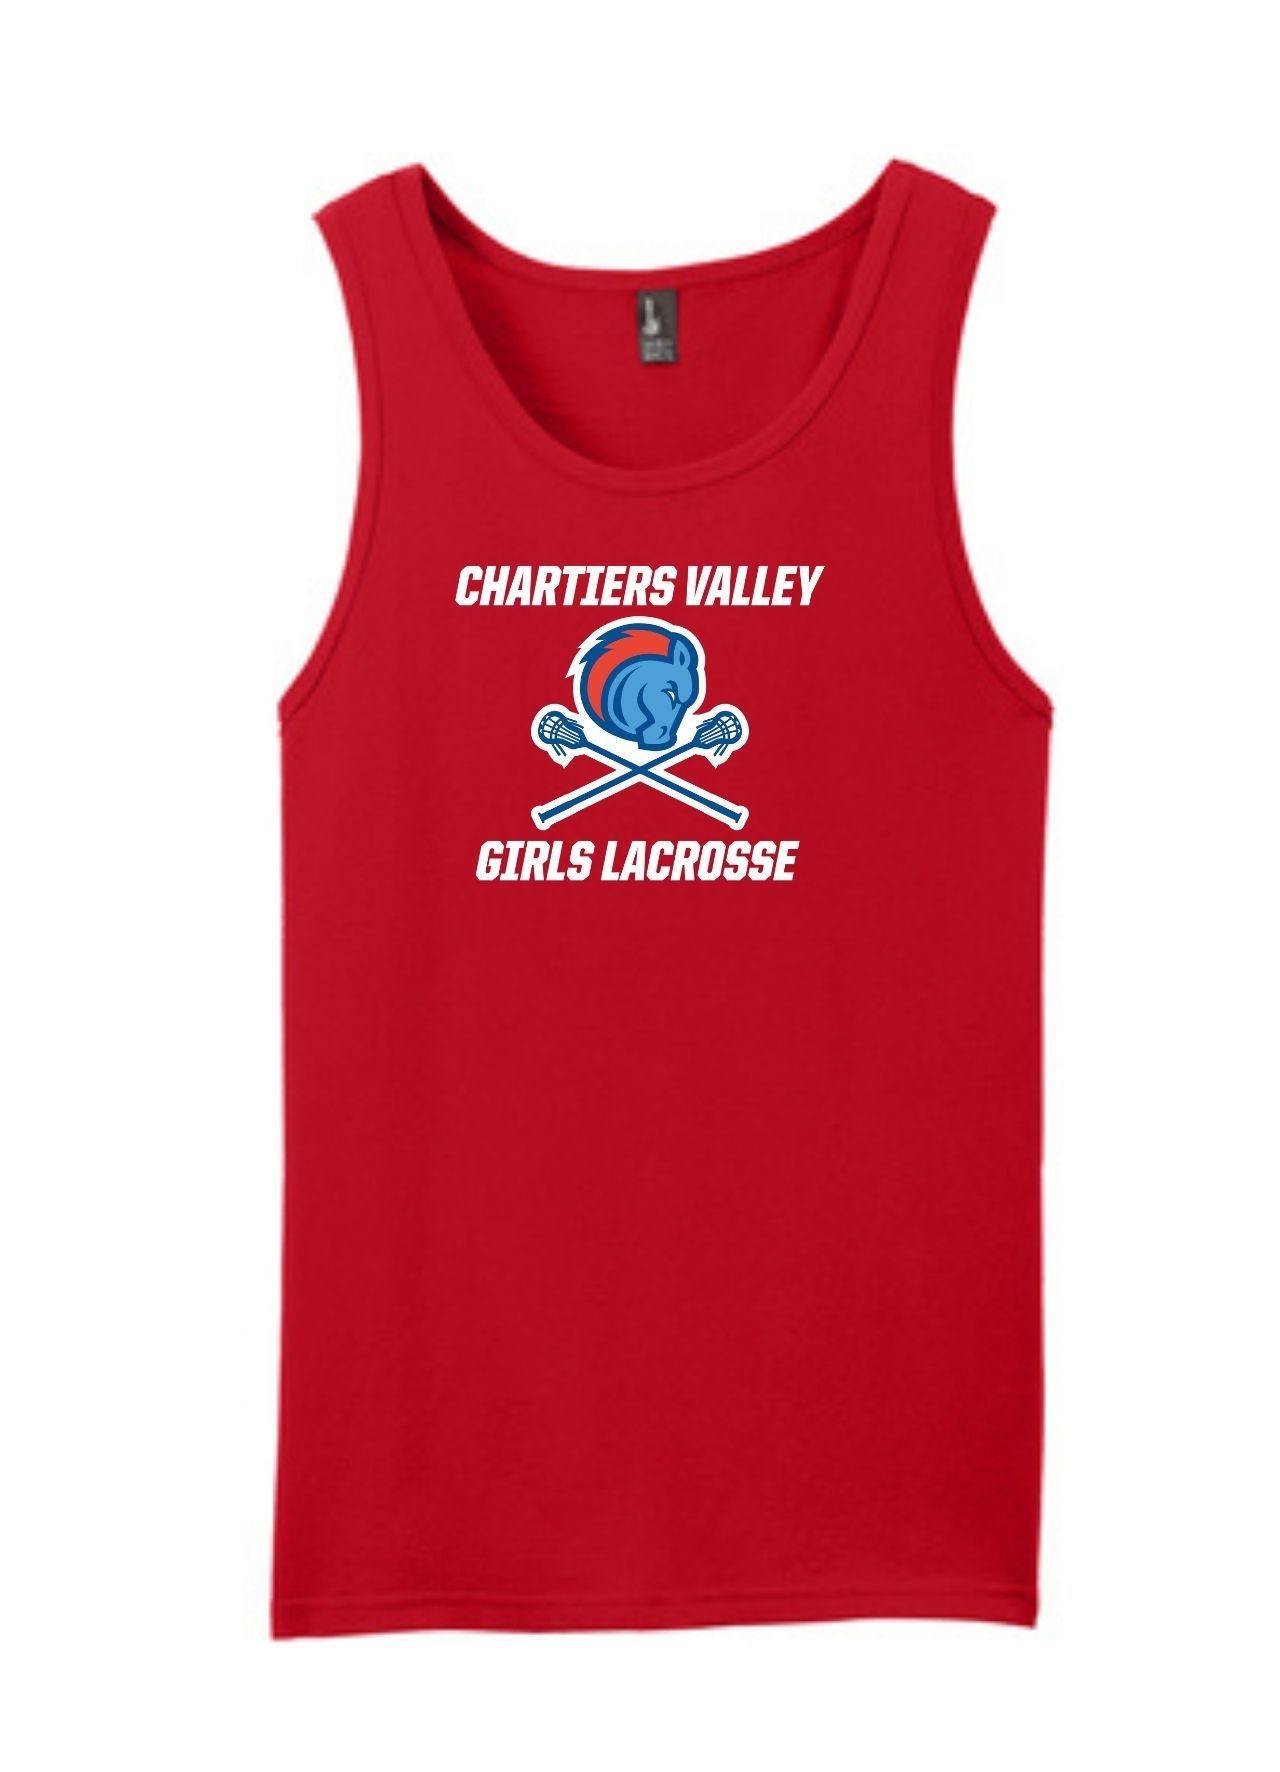 Chartiers Valley Concert Tank - Red